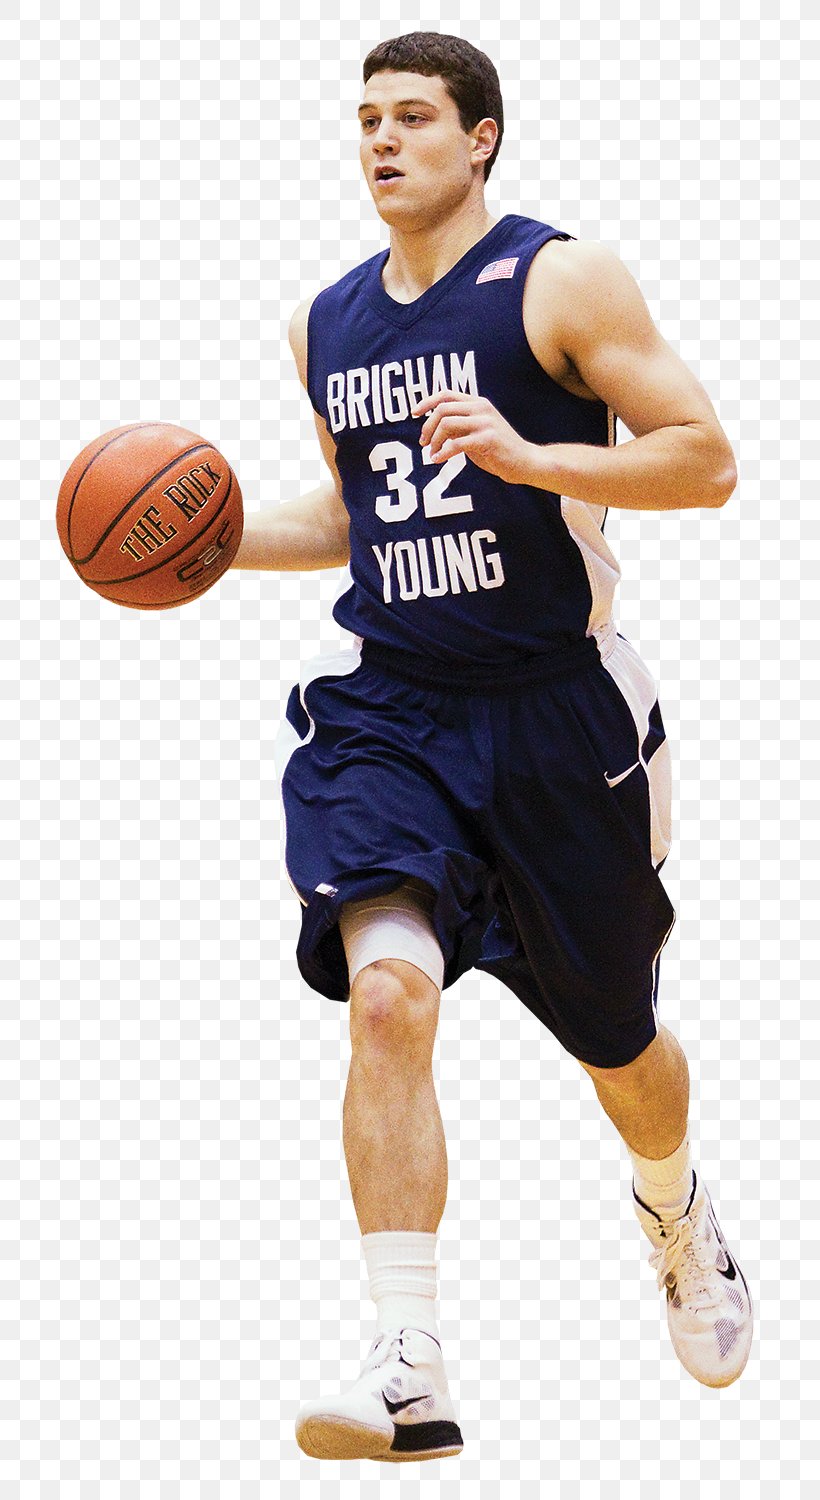 Jimmer Fredette Basketball Player PCD Pharma Franchise Serbia Molecules Private Limited Brigham Young University, PNG, 765x1500px, Jimmer Fredette, Arm, Ball, Ball Game, Basketball Download Free